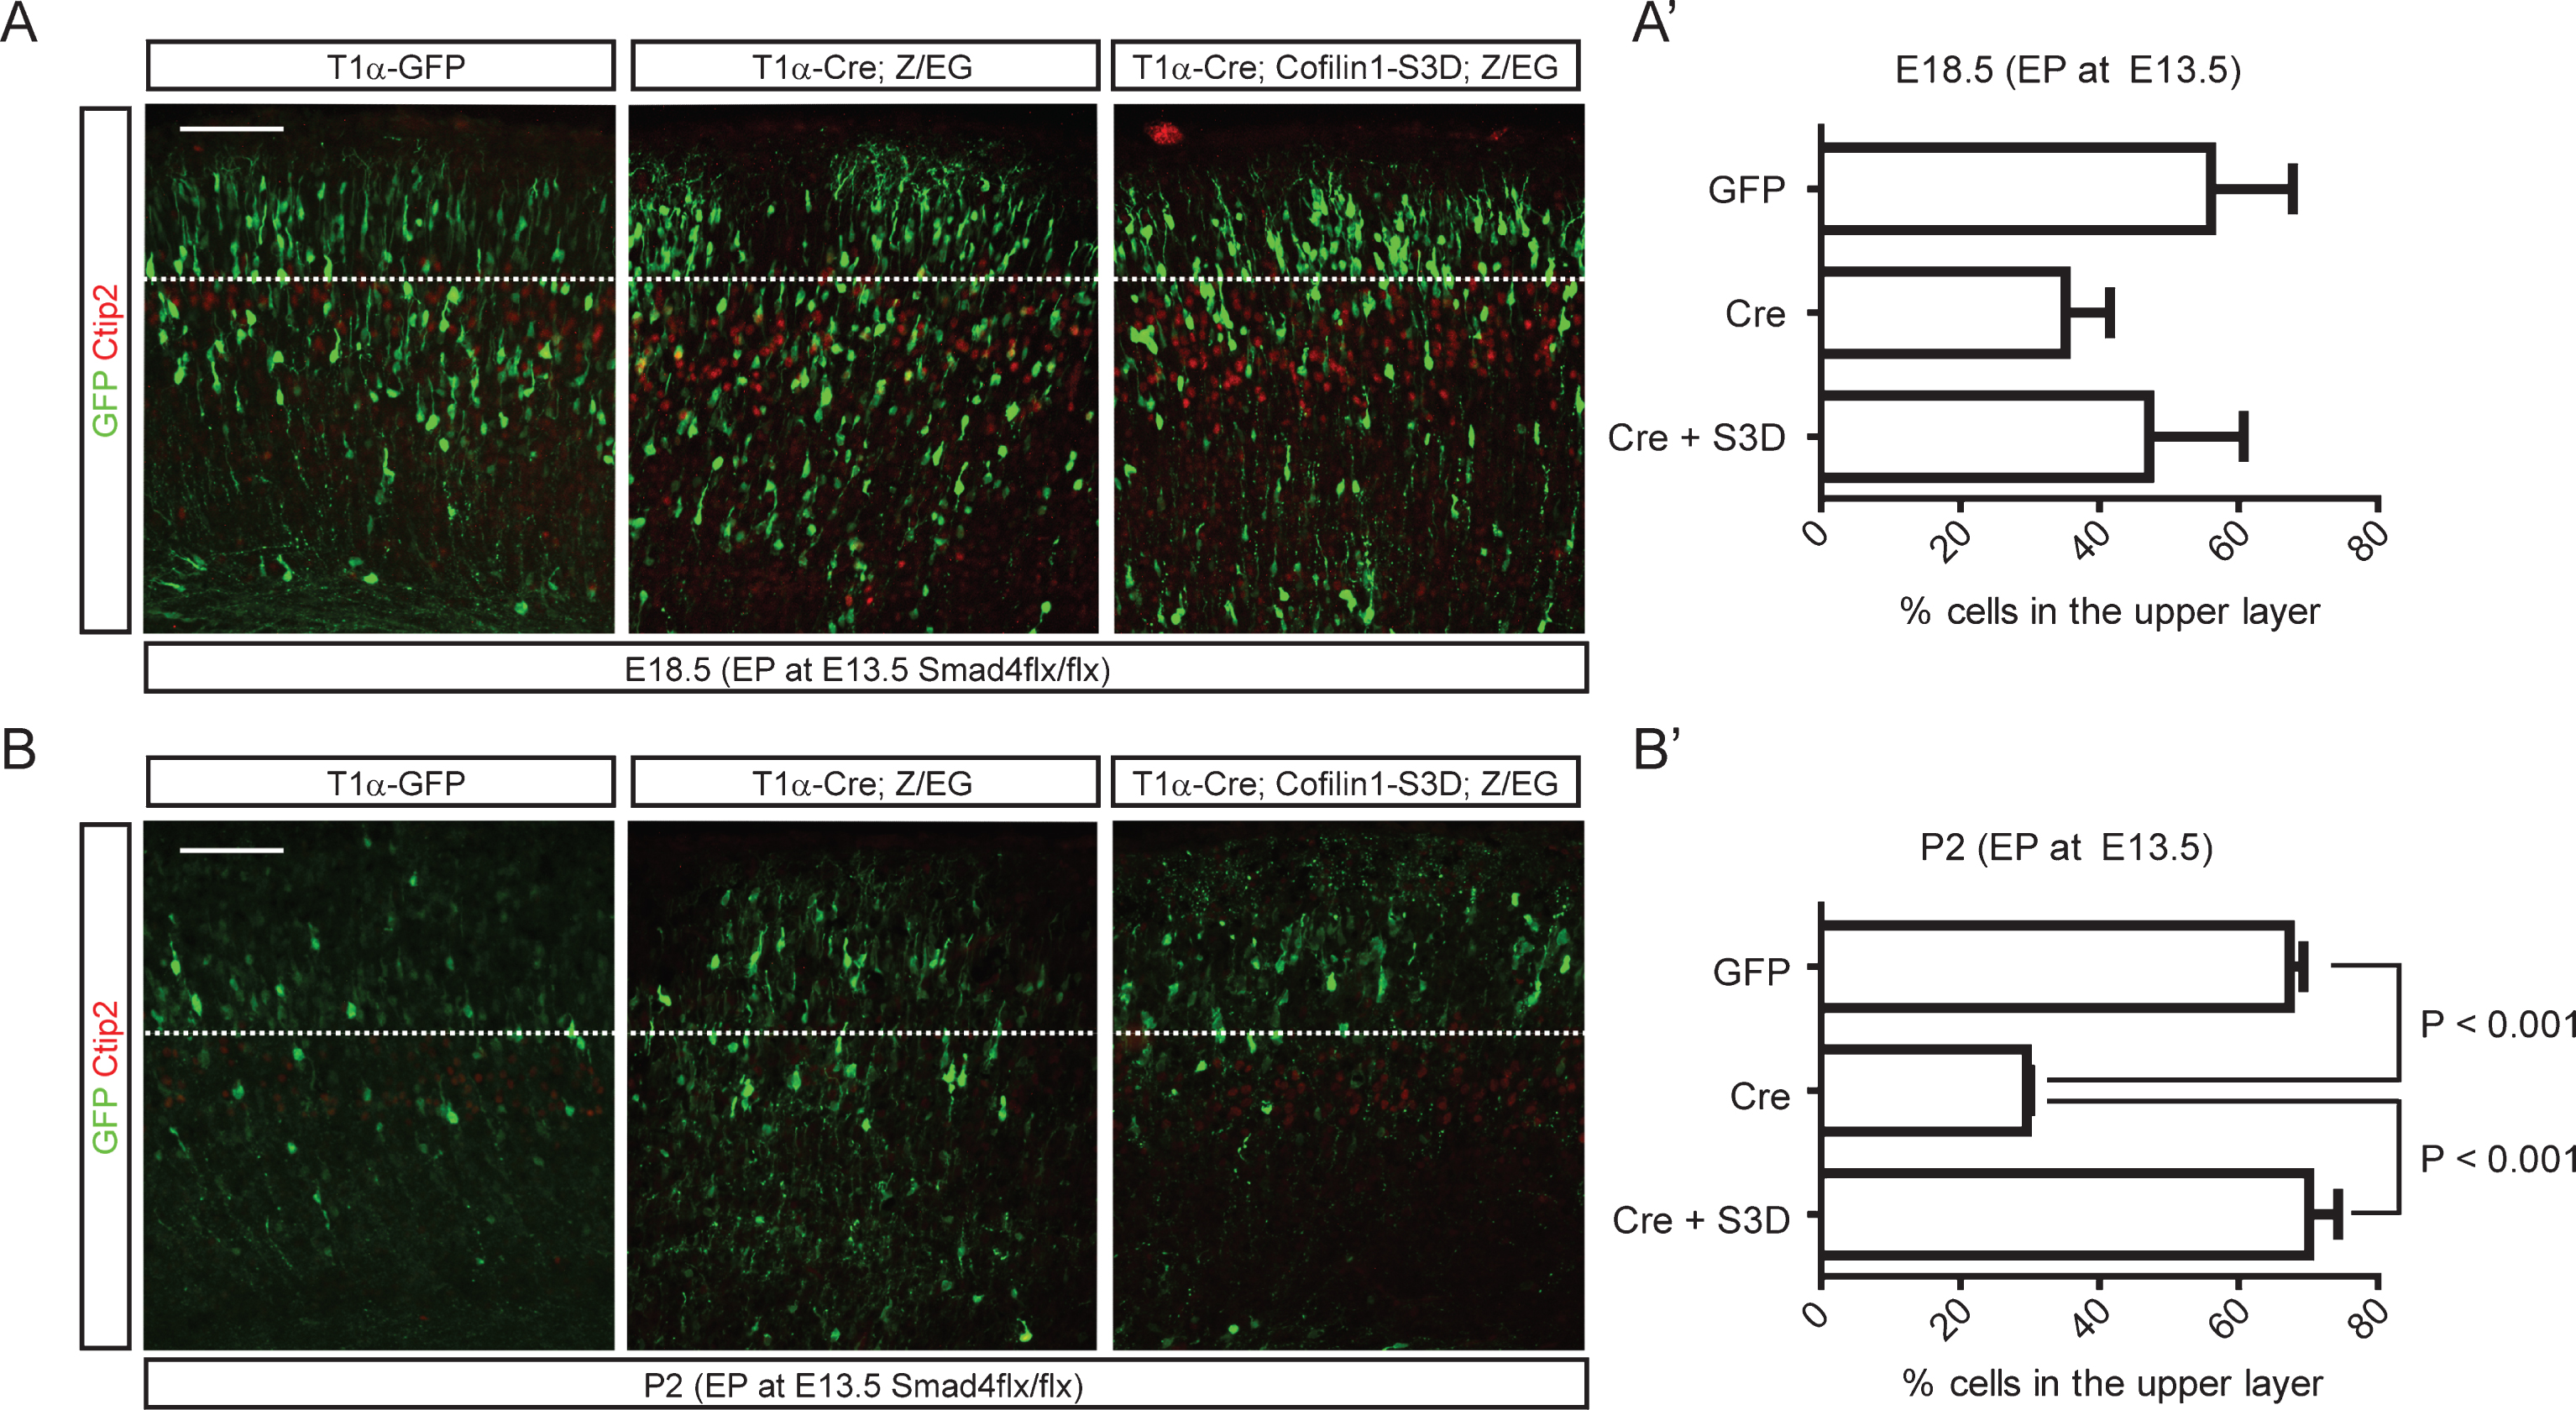 Rescue of neuronal migration defects of Smad4 mutant neurons by cofilin-1-S3D expression. E13.5 Smad4flx/flx embryos were electroporated with 1) T1α-GFP, 2) T1α-Cre;Z/EG, or 3) T1α-Cre;cofilin-1-S3D;Z/EG, a Cre reporter expressing GFP after recombination, and analyzed at E18.5 (A, A’) and P2 (B, B’) (n = 3). Electroporated brains were stained for GFP and Ctip2, and GFP+ neurons in the upper layer above the Ctip2+ layer were counted. Student’s t-test was conducted to determine the statistical significance of the difference between the groups. Scale bars = 100 μm.